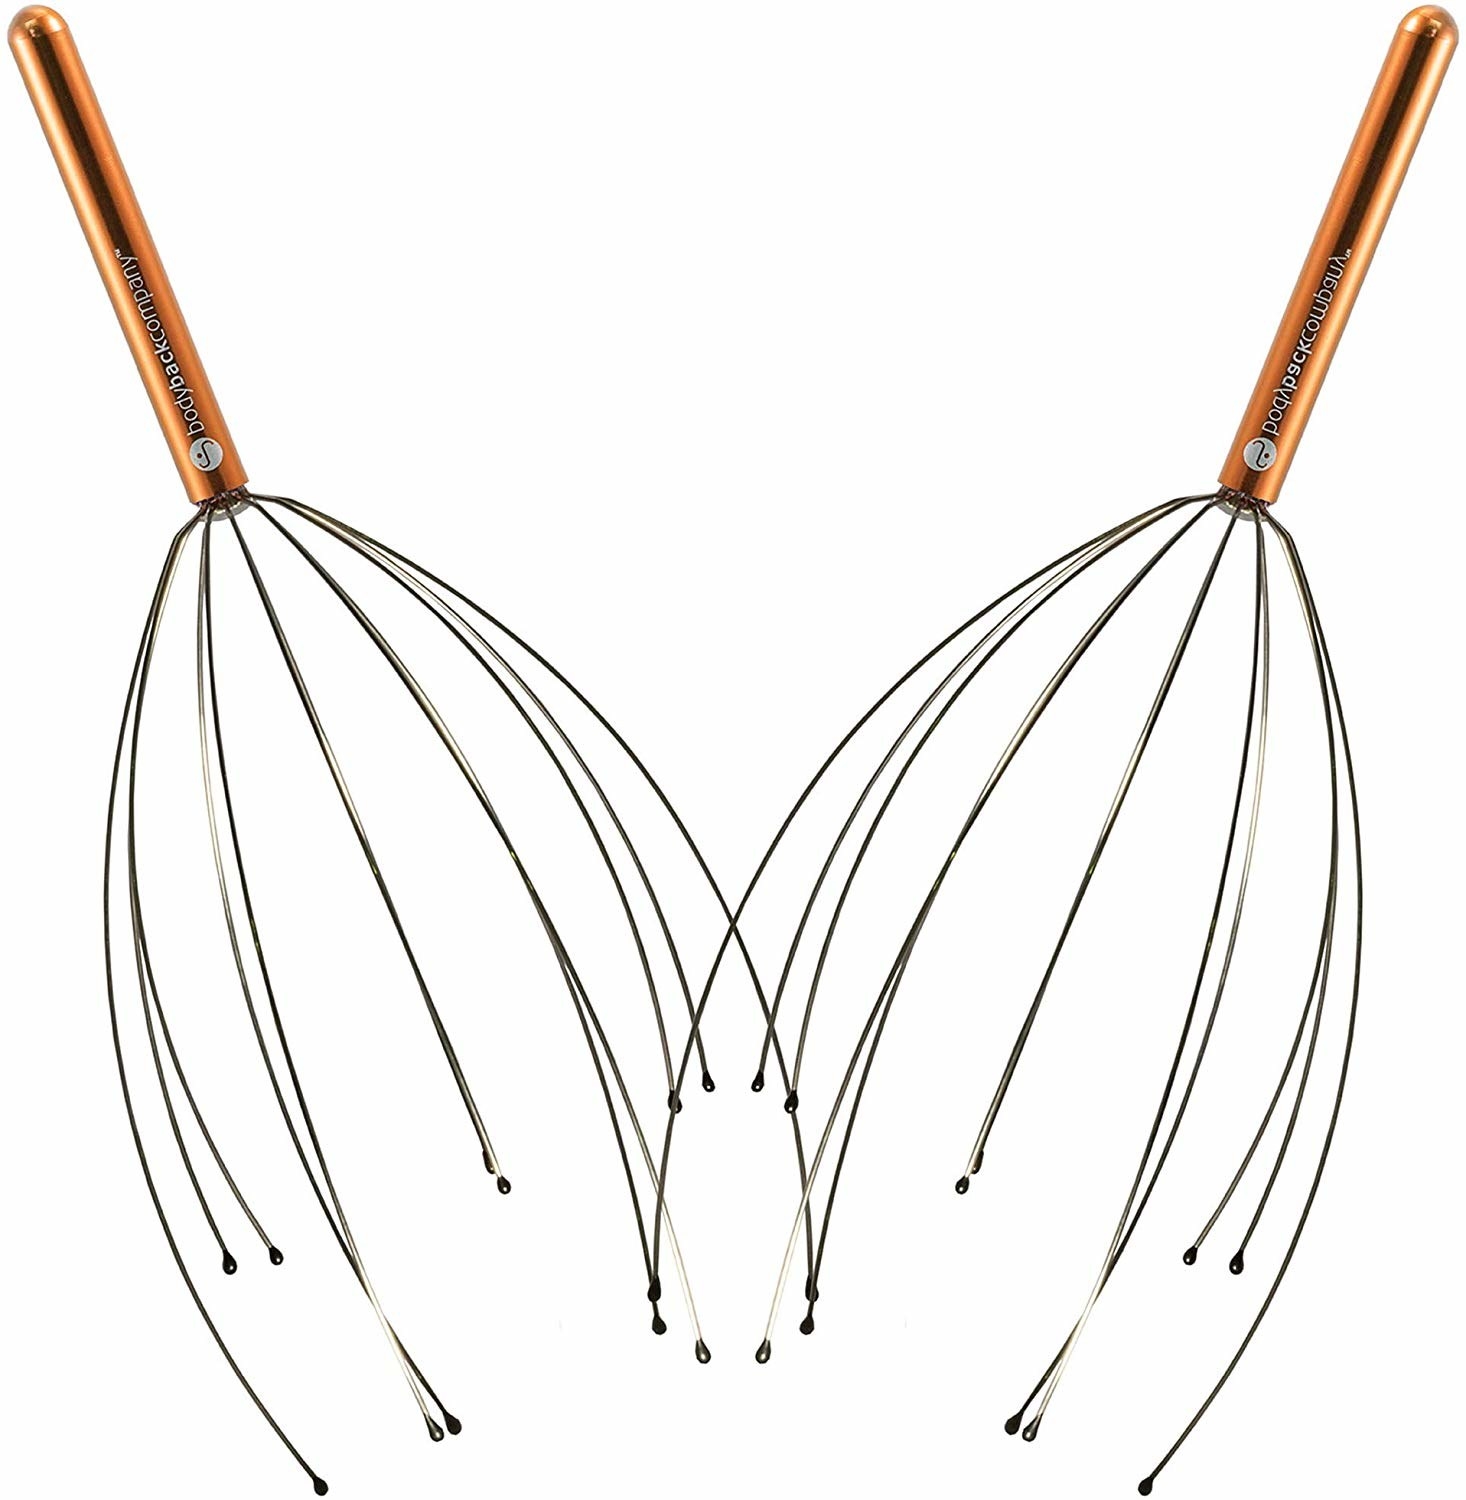 two head massagers with a handle on top, curved wires, and acrylic beads on the end